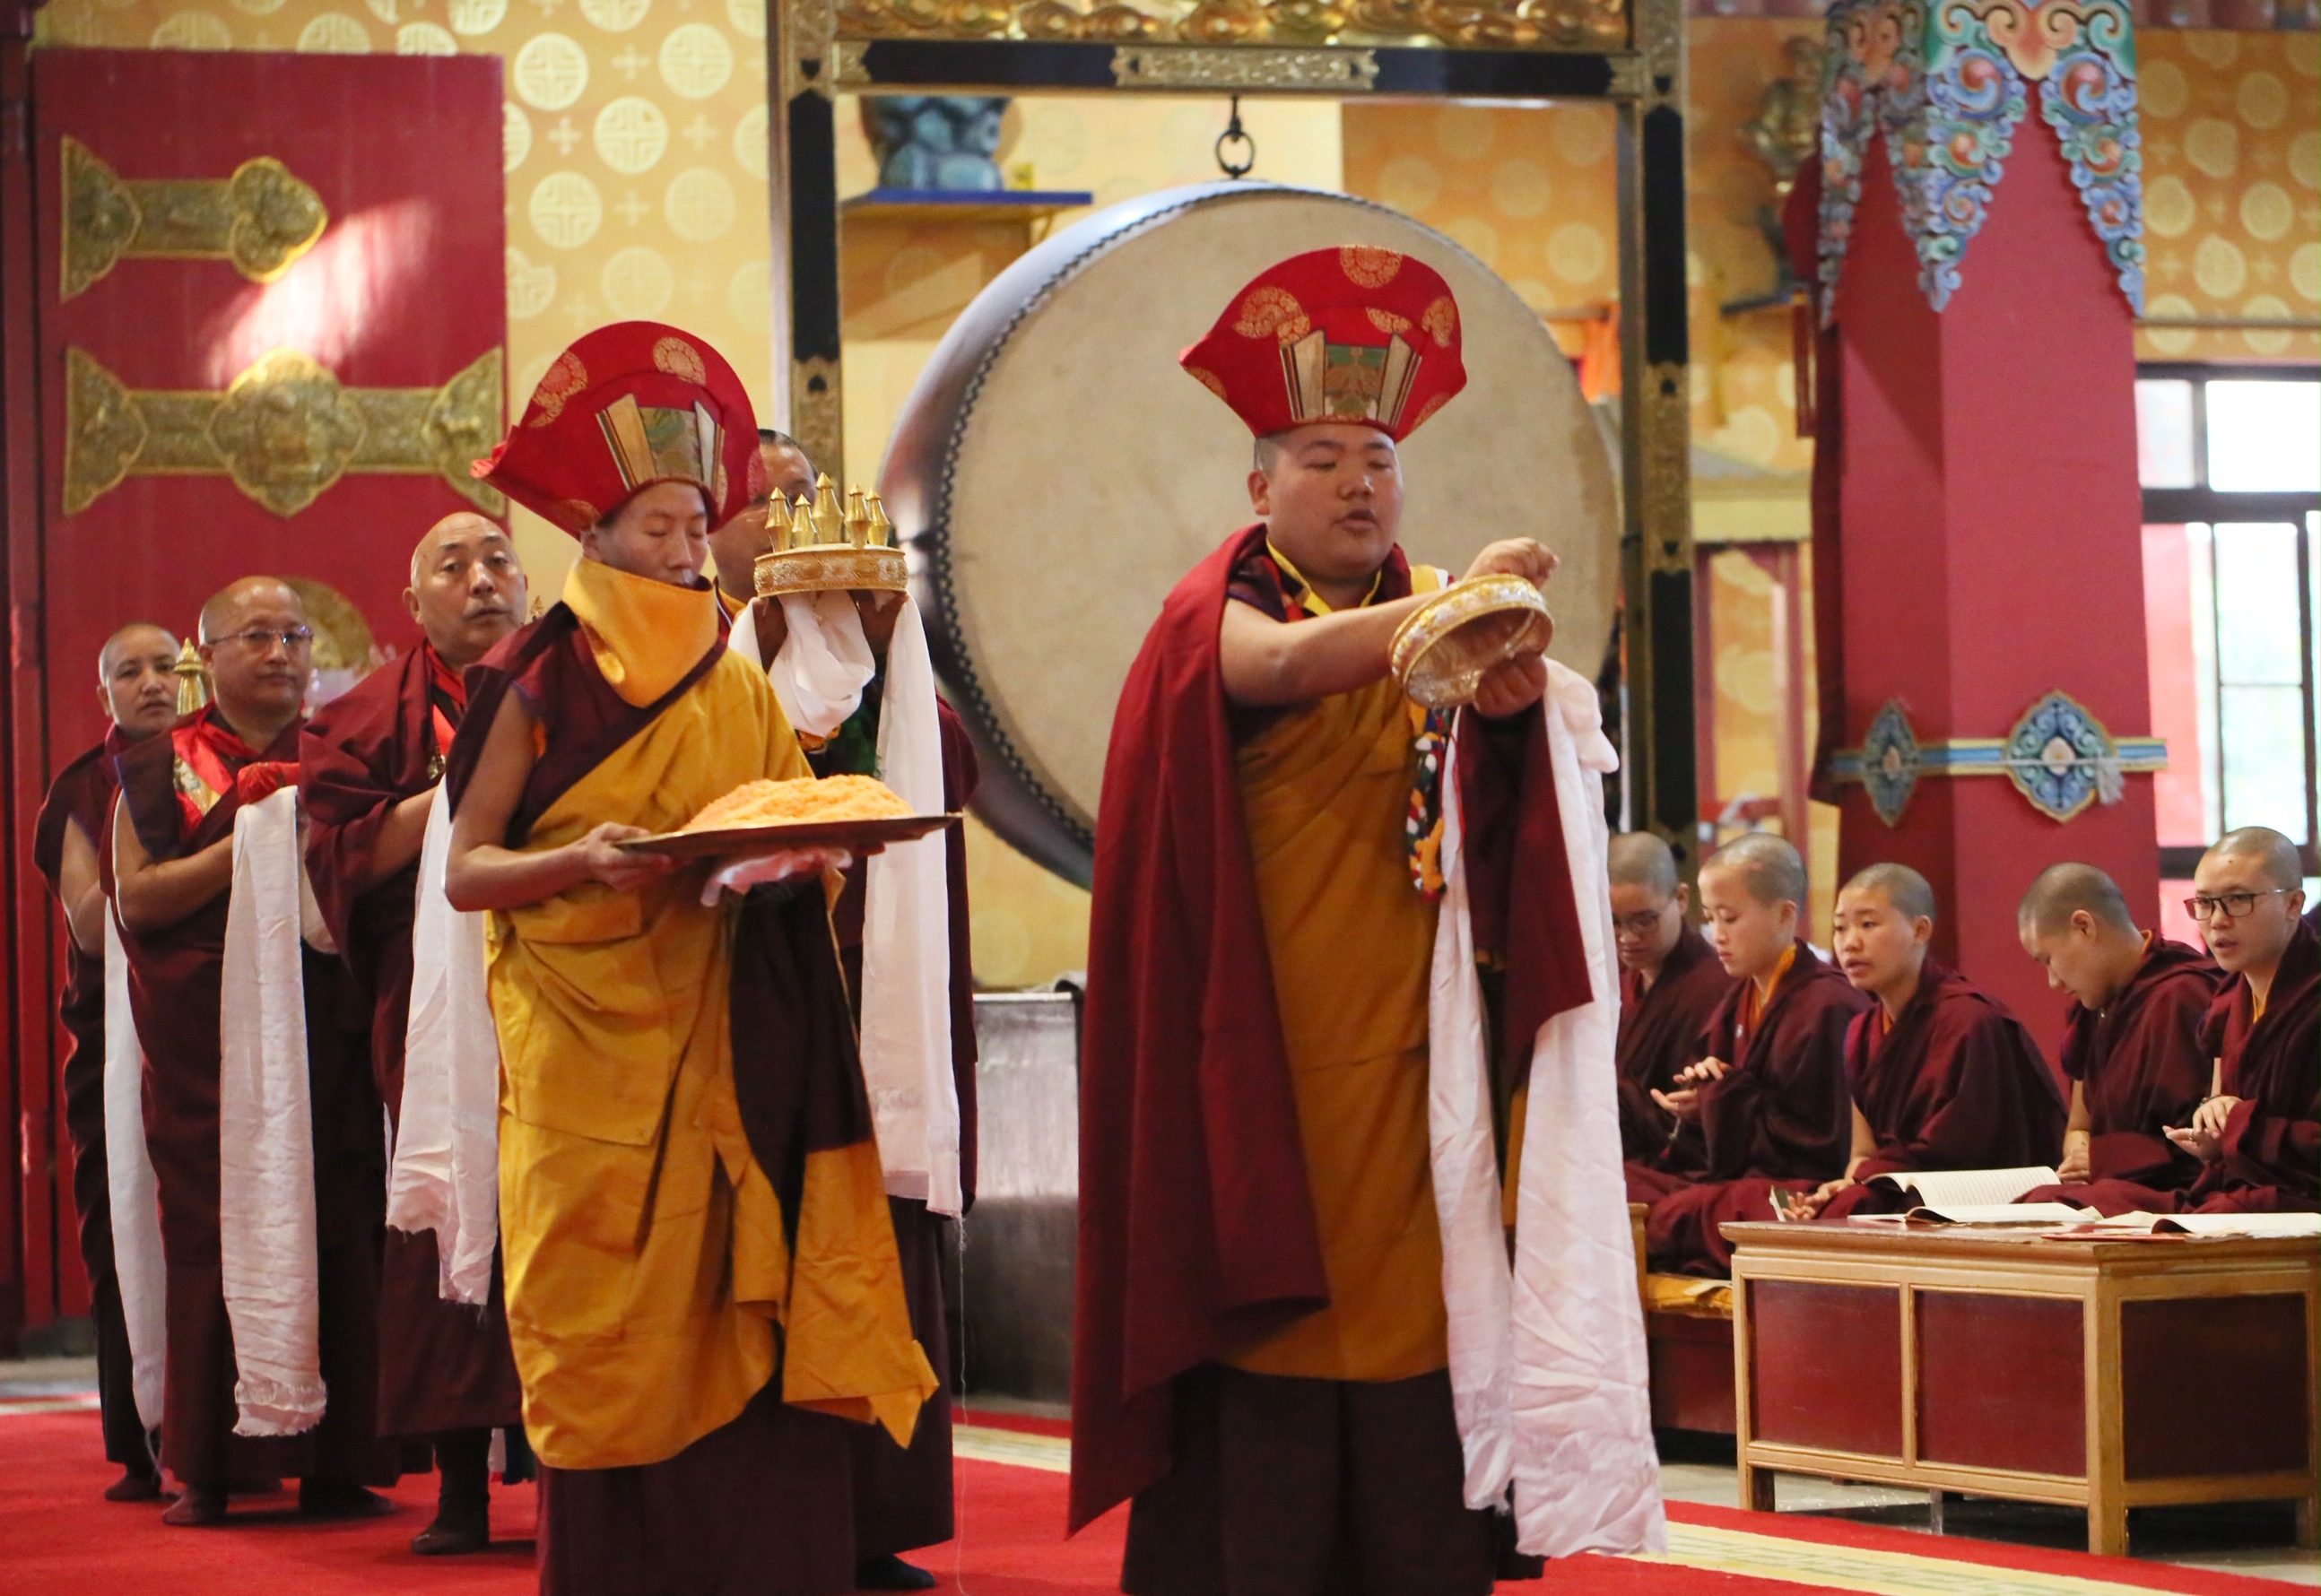 The Nuns Host Tibetan New Year: the Year of the Iron Mouse Begins